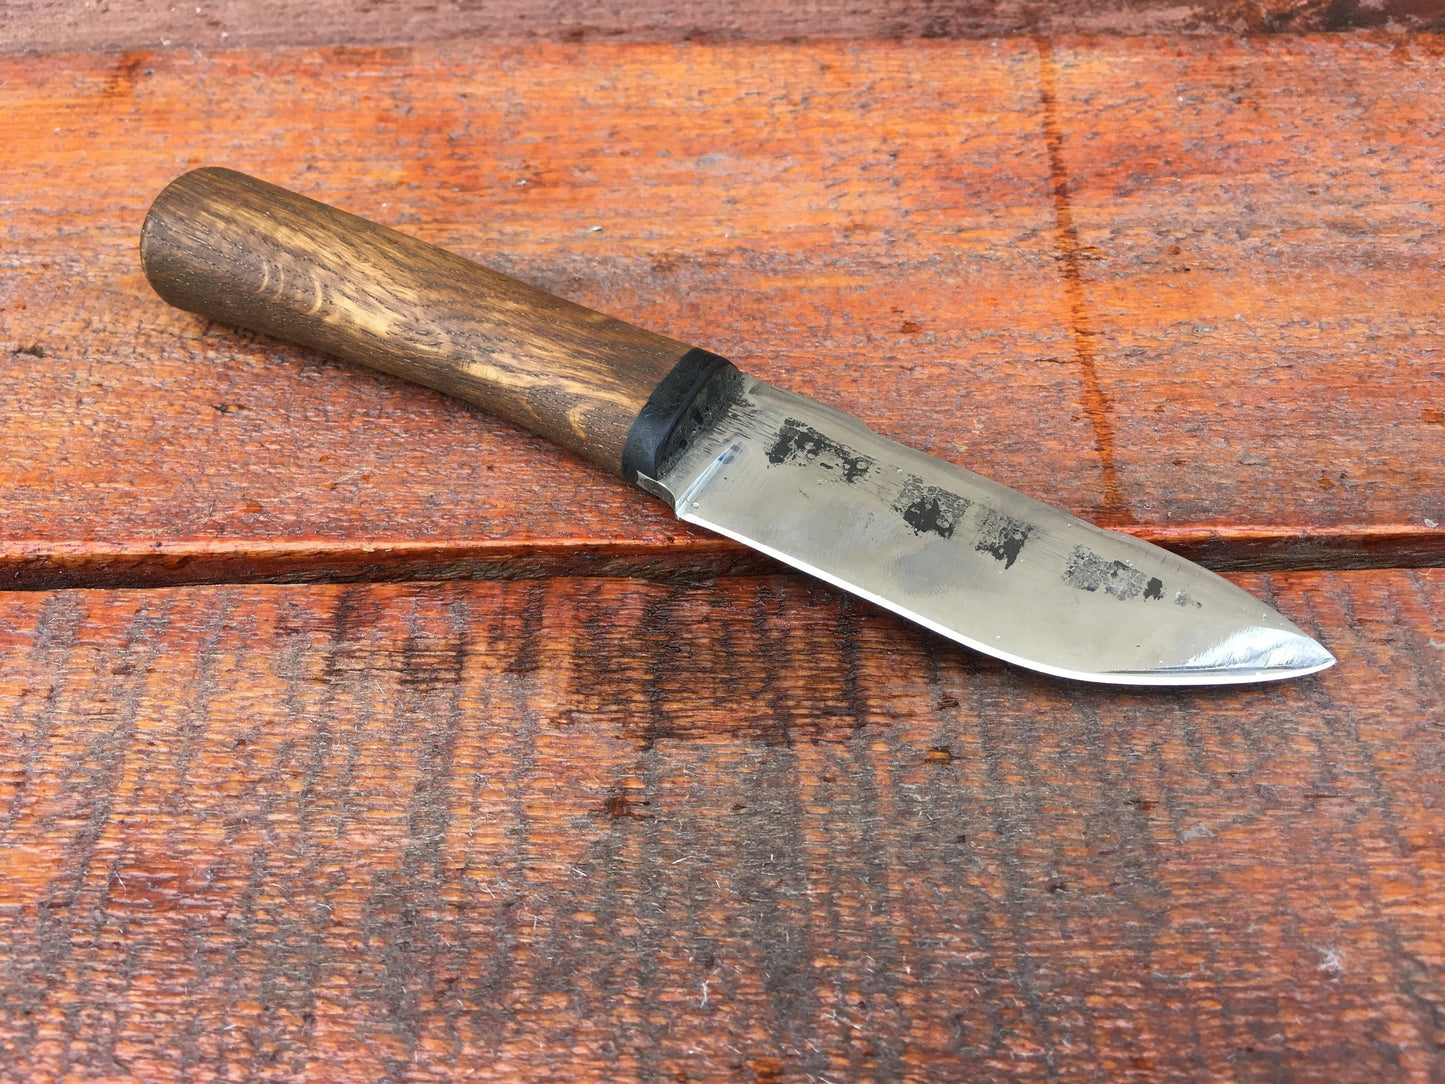 Stainless steel hand forged knife, hunting knife, mens gift, hunting tools, man cave gift, camp knife, hiking knife, custom knife, cutlery